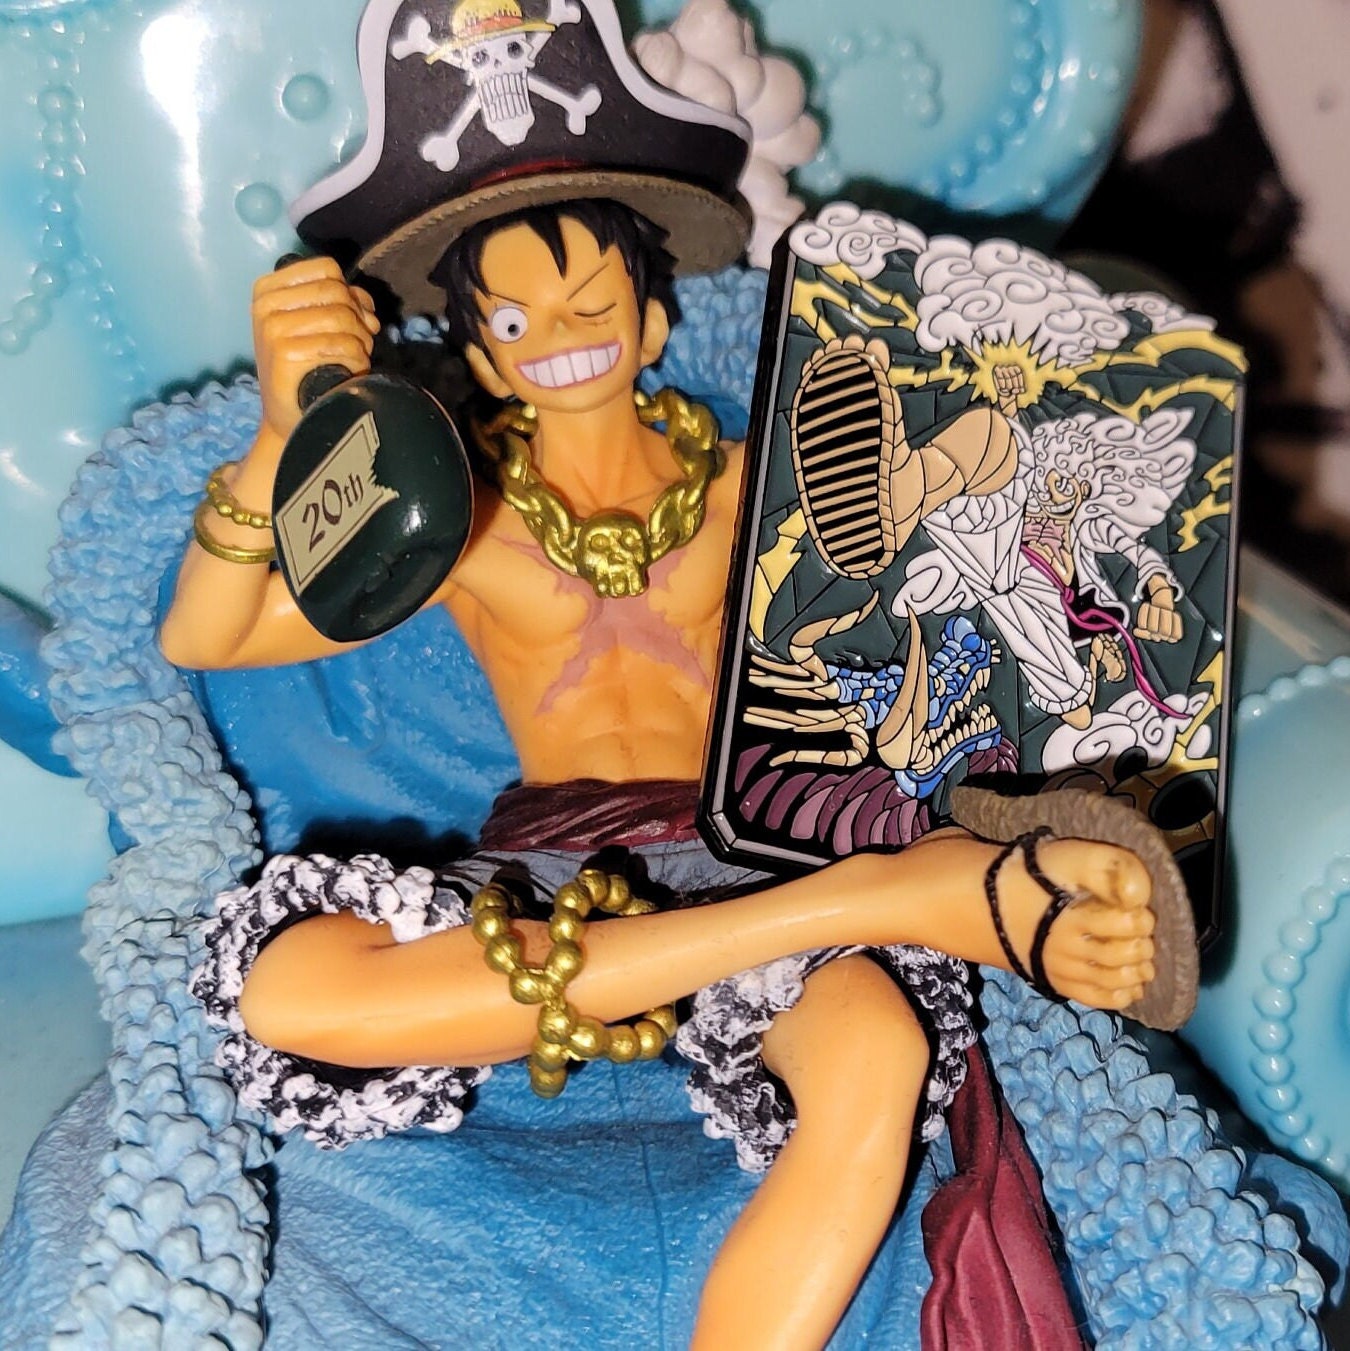 a drawing of luffy  Pin for Sale by baki-21